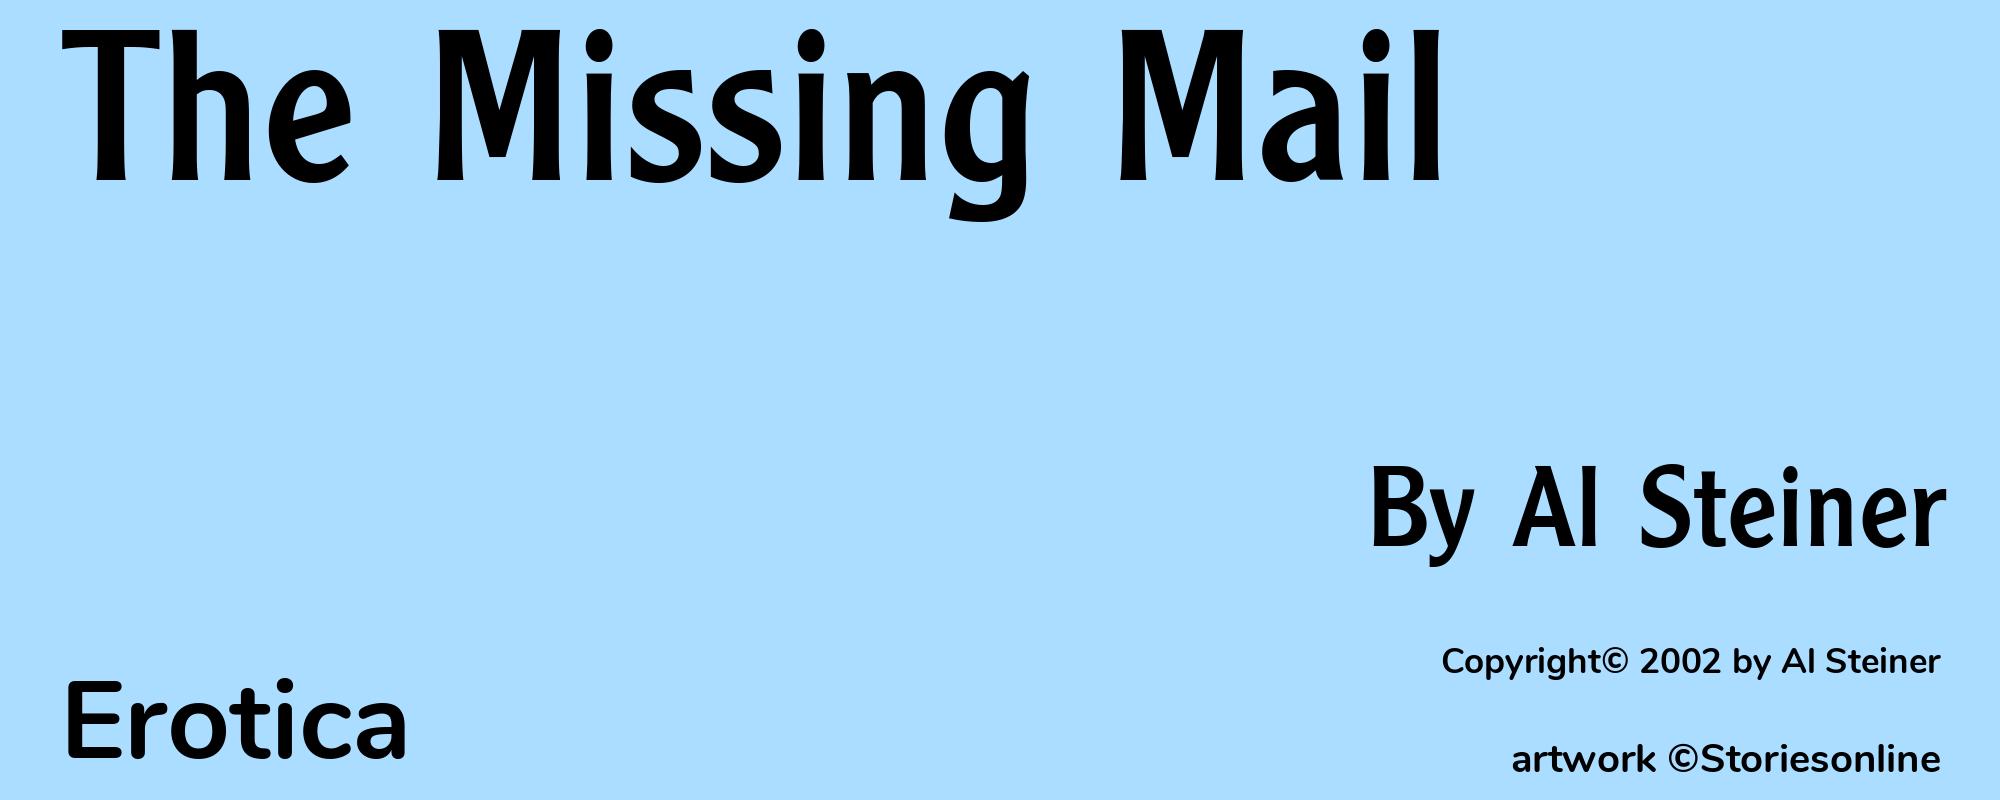 The Missing Mail - Cover